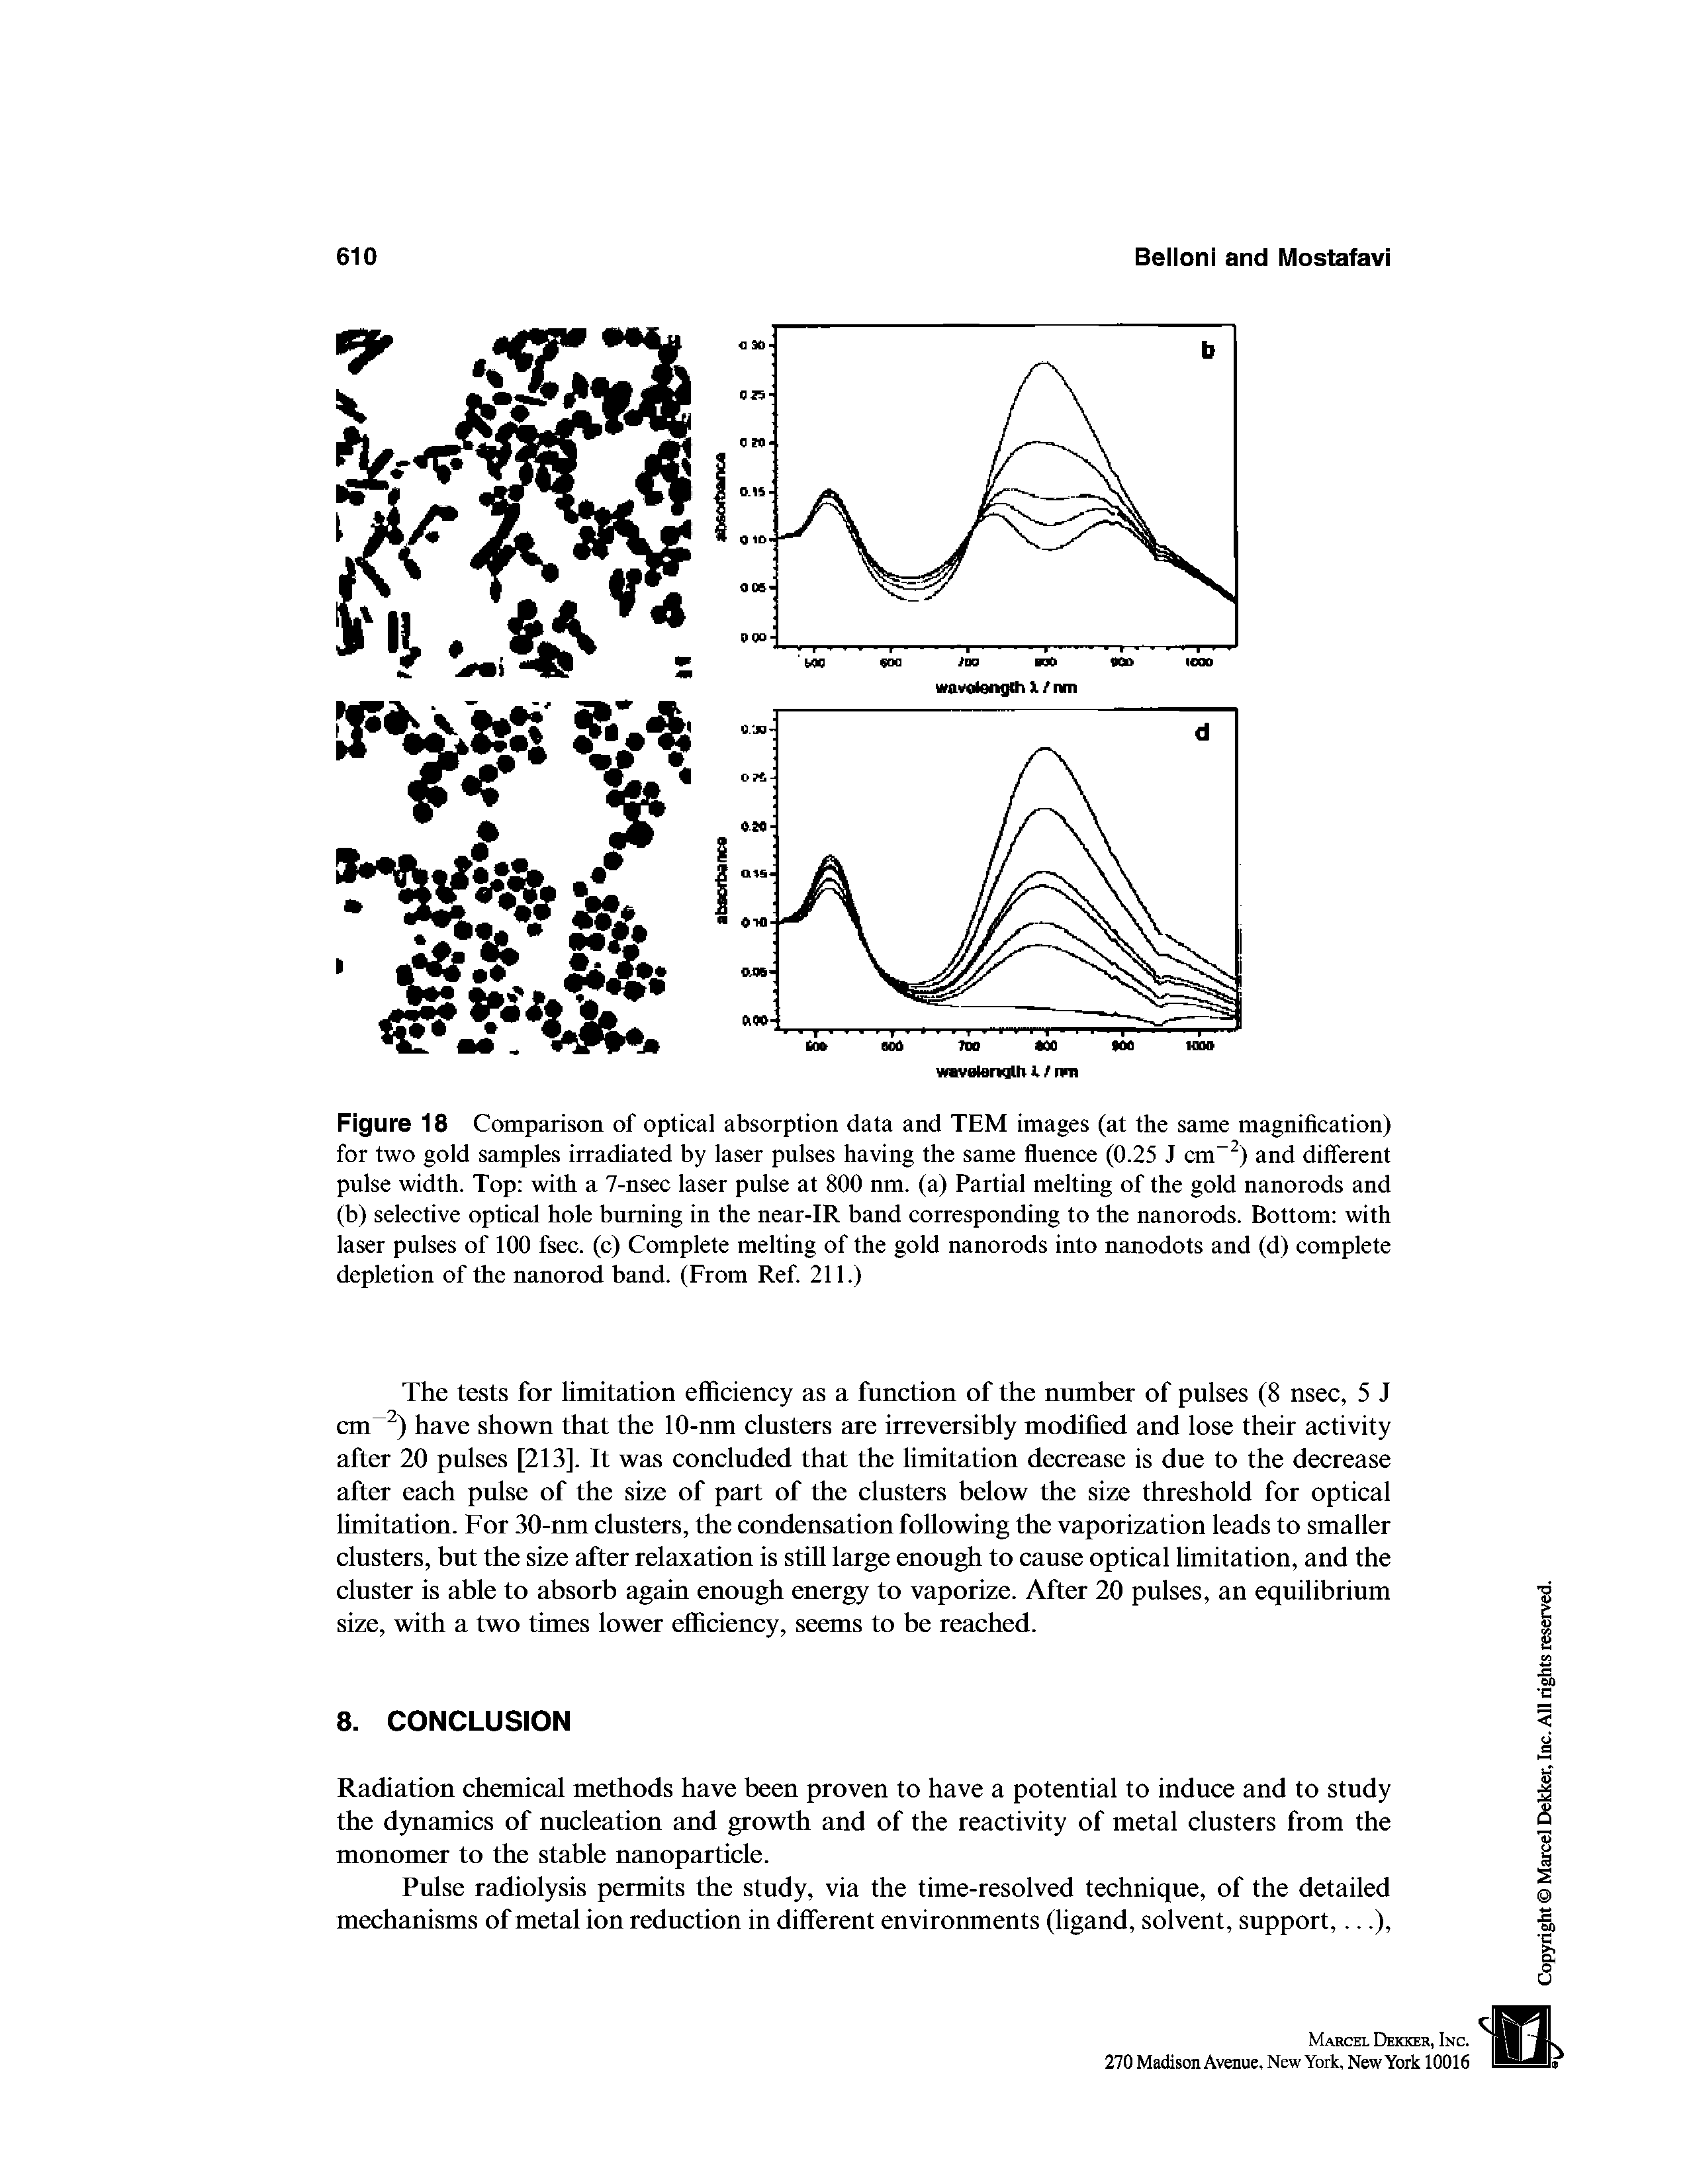 Figure 18 Comparison of optical absorption data and TEM images (at the same magnification) for two gold samples irradiated by laser pulses having the same fluence (0.25 J cm ) and different pulse width. Top with a 7-nsec laser pulse at 800 nm. (a) Partial melting of the gold nanorods and (b) selective optical hole burning in the near-IR band corresponding to the nanorods. Bottom with laser pulses of 100 fsec. (c) Complete melting of the gold nanorods into nanodots and (d) complete depletion of the nanorod band. (From Ref 211.)...